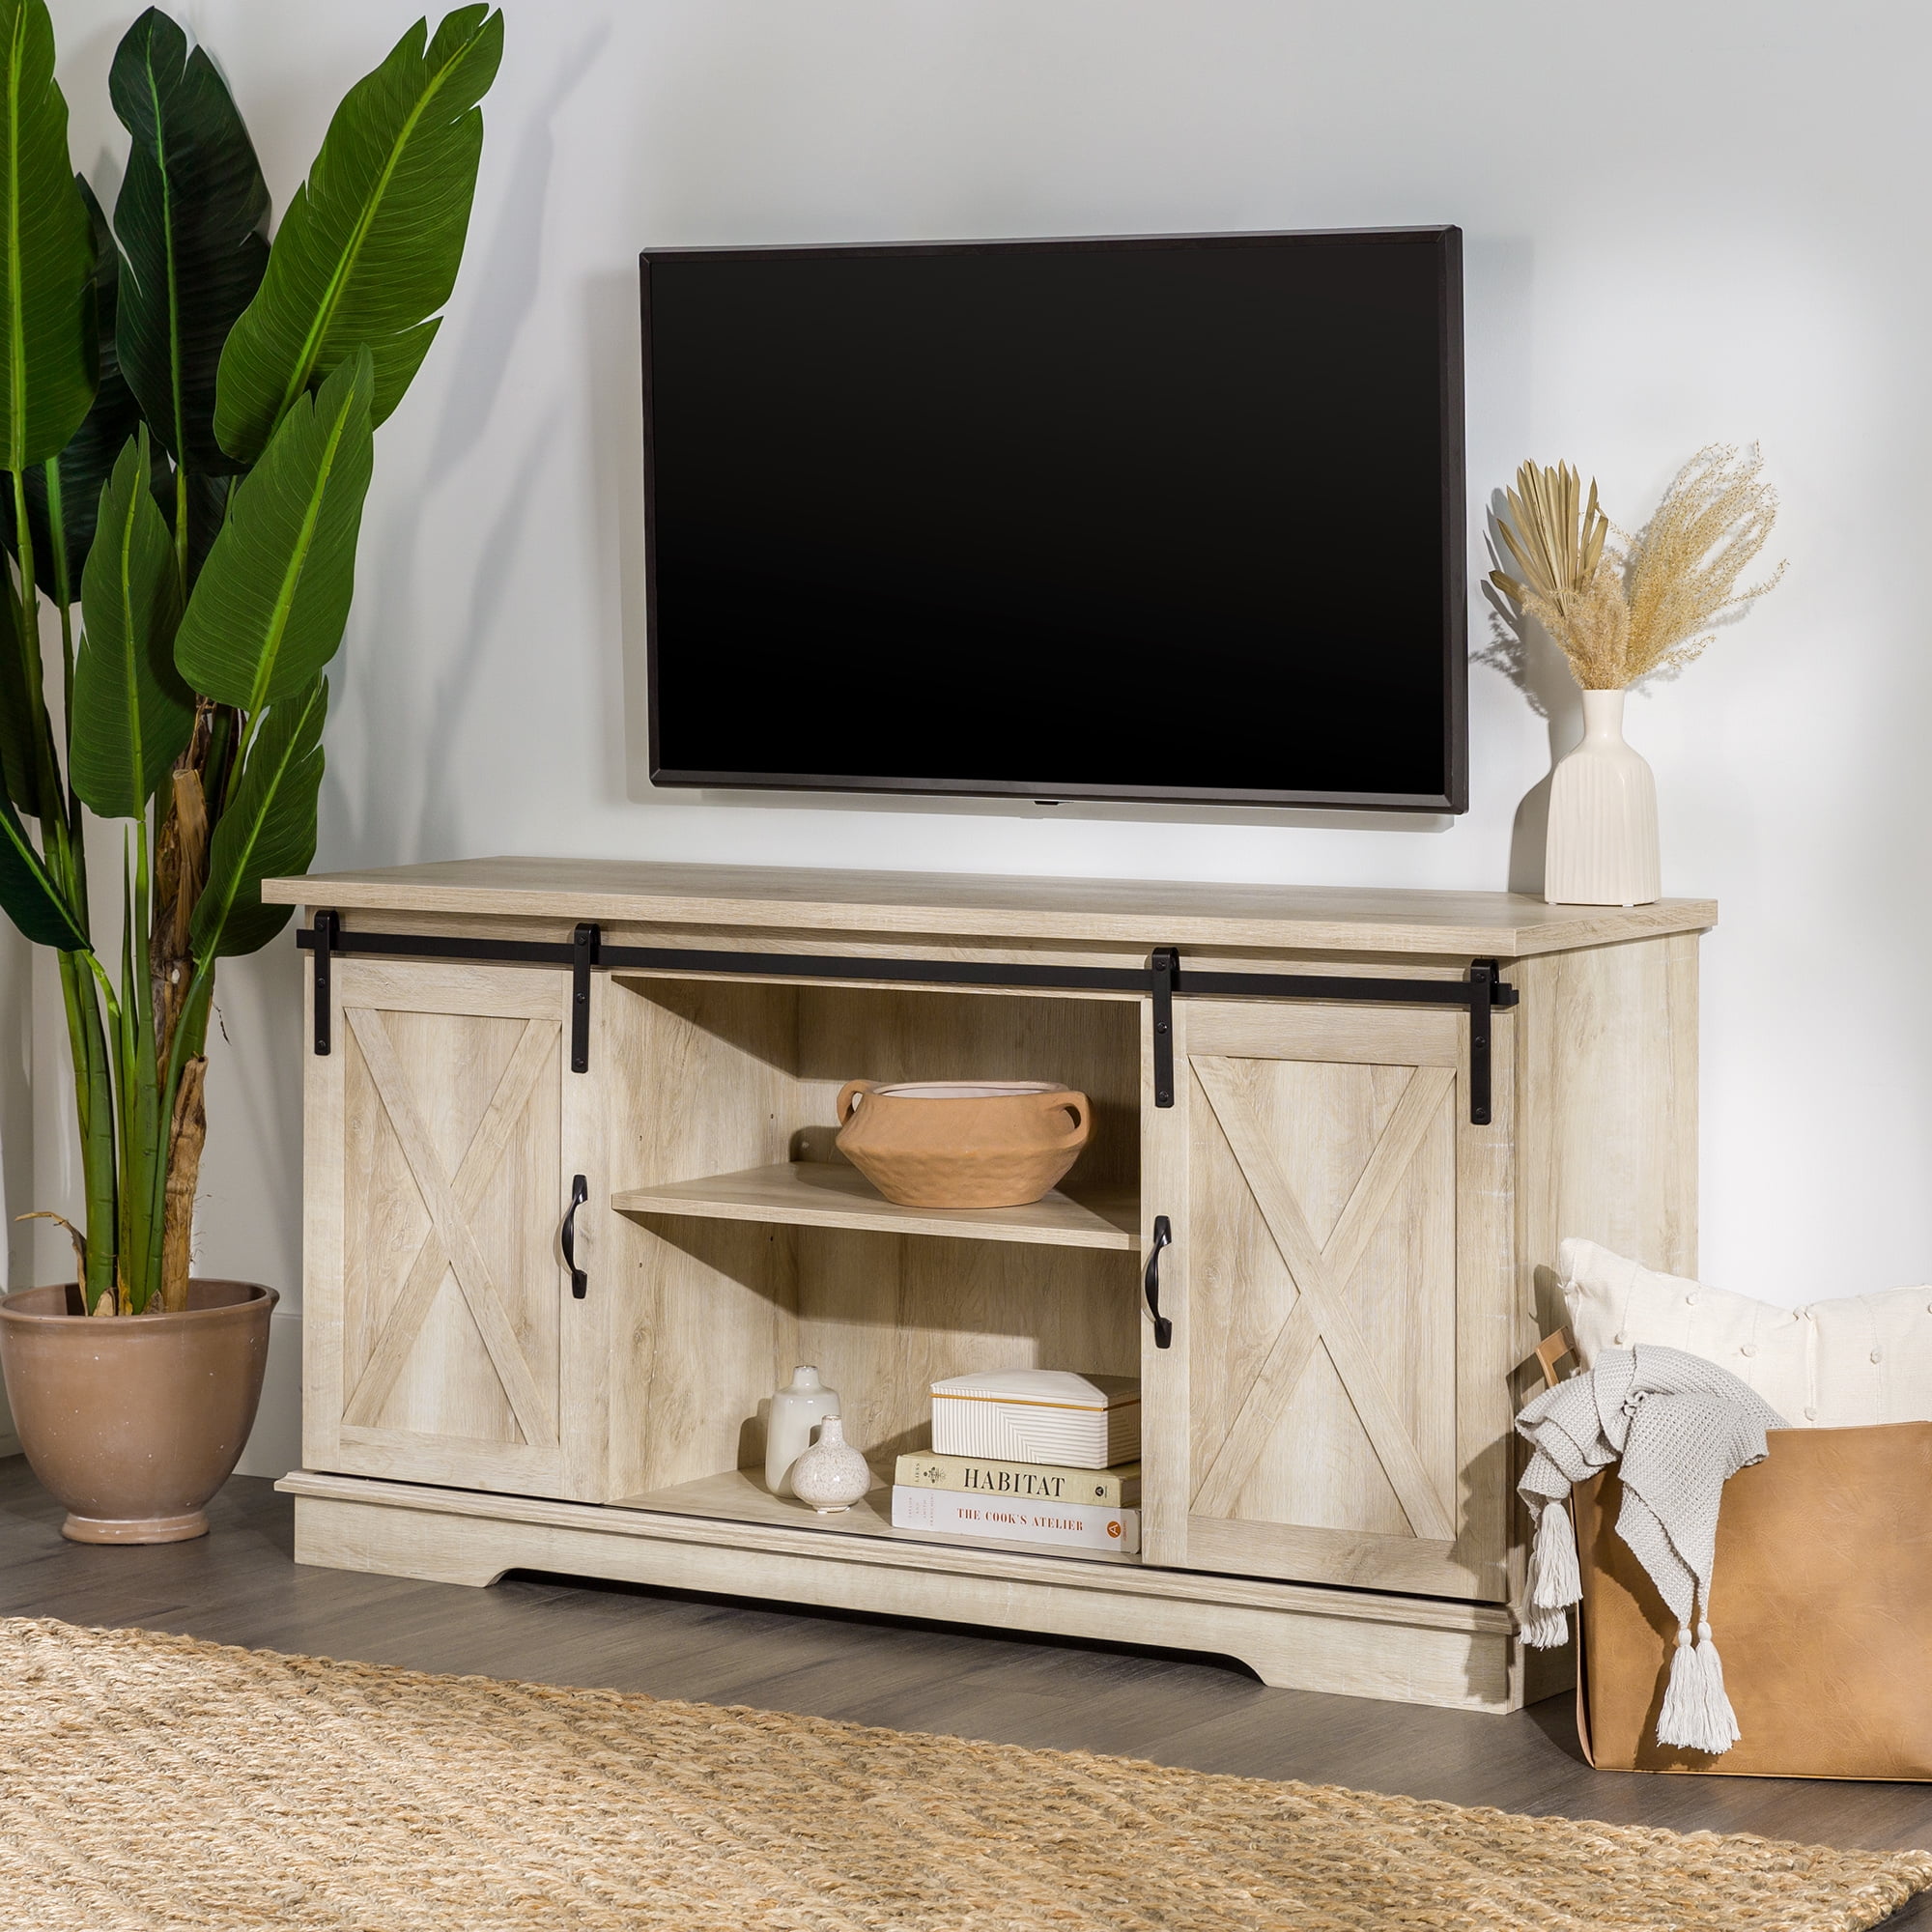 Whitewashed Oak Mahara Wood Effect TV Stand for TVs up to 55" with Shelving 